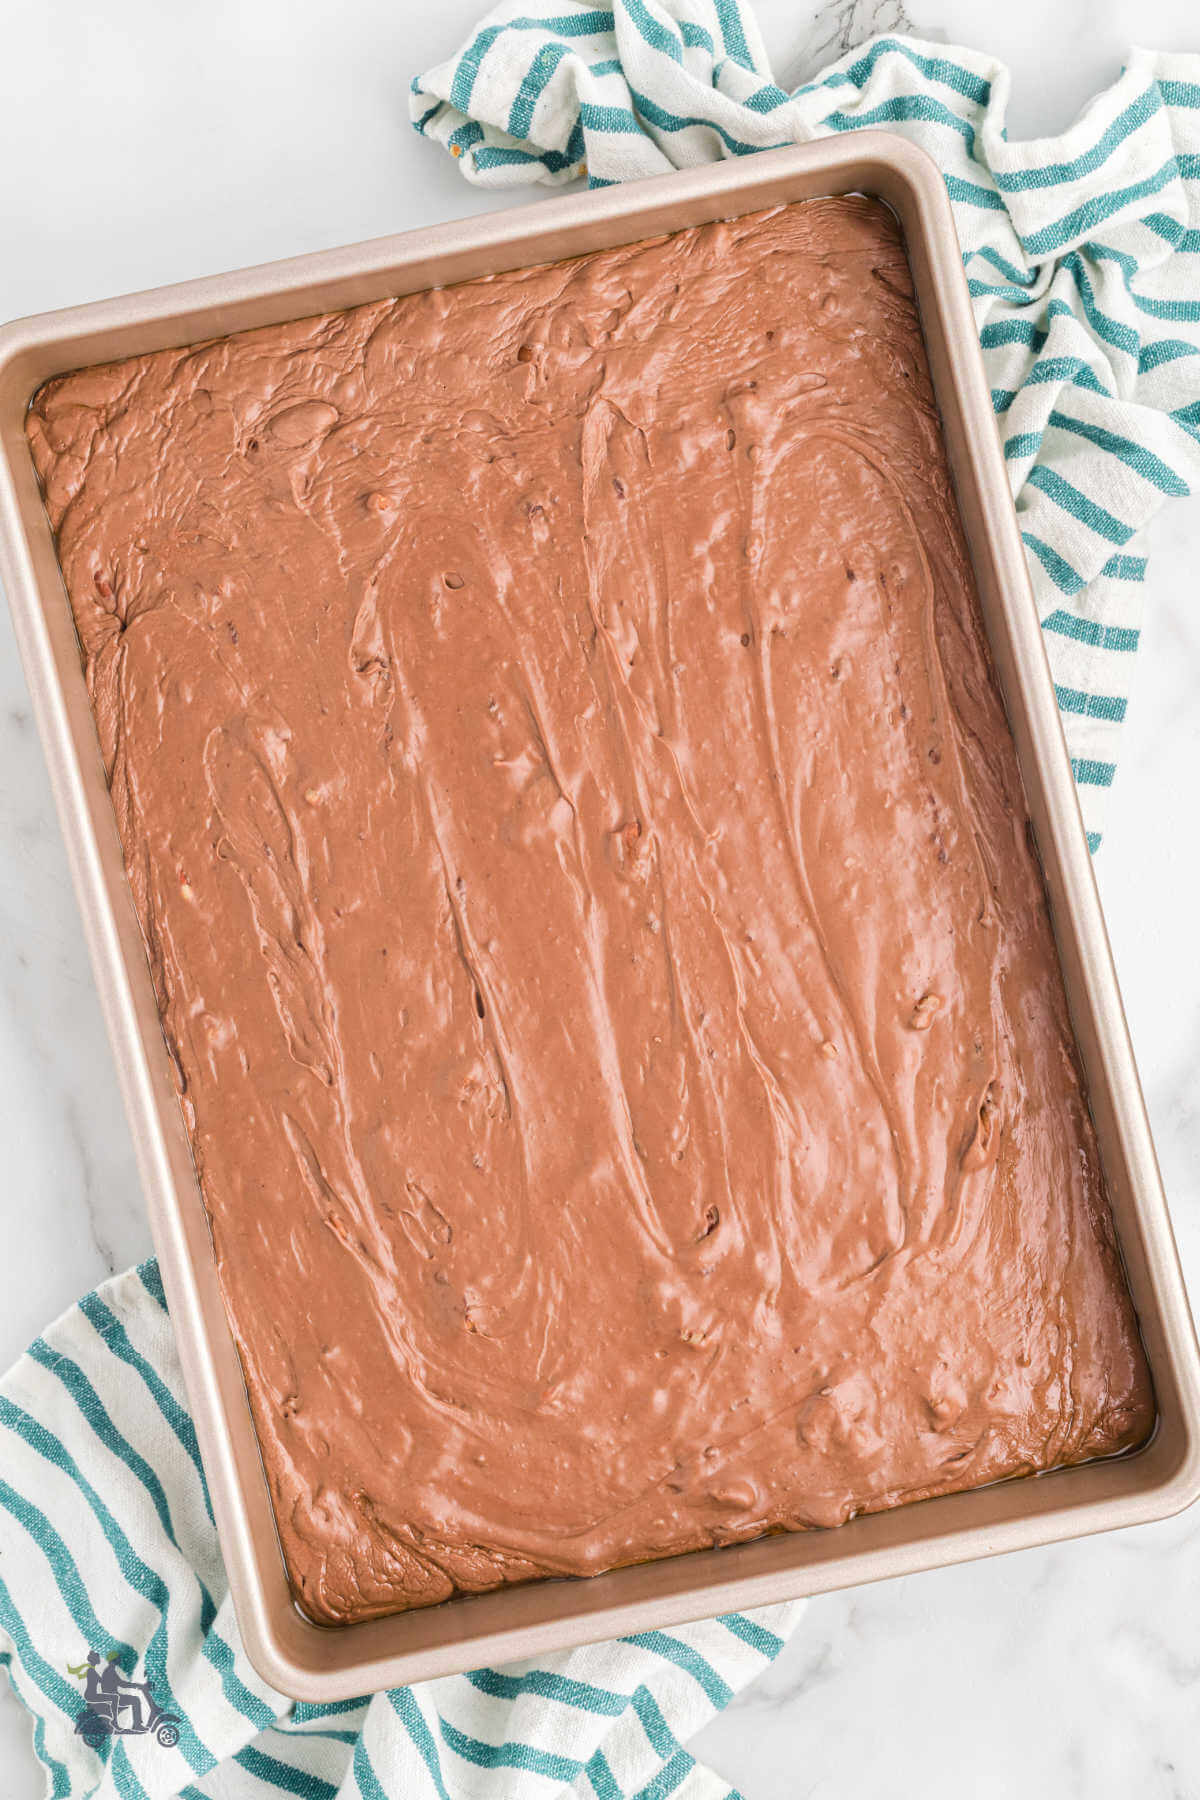 Creamy Chocolate Fudge getting set in a rectangular pan before the candy can be cut into portions. 